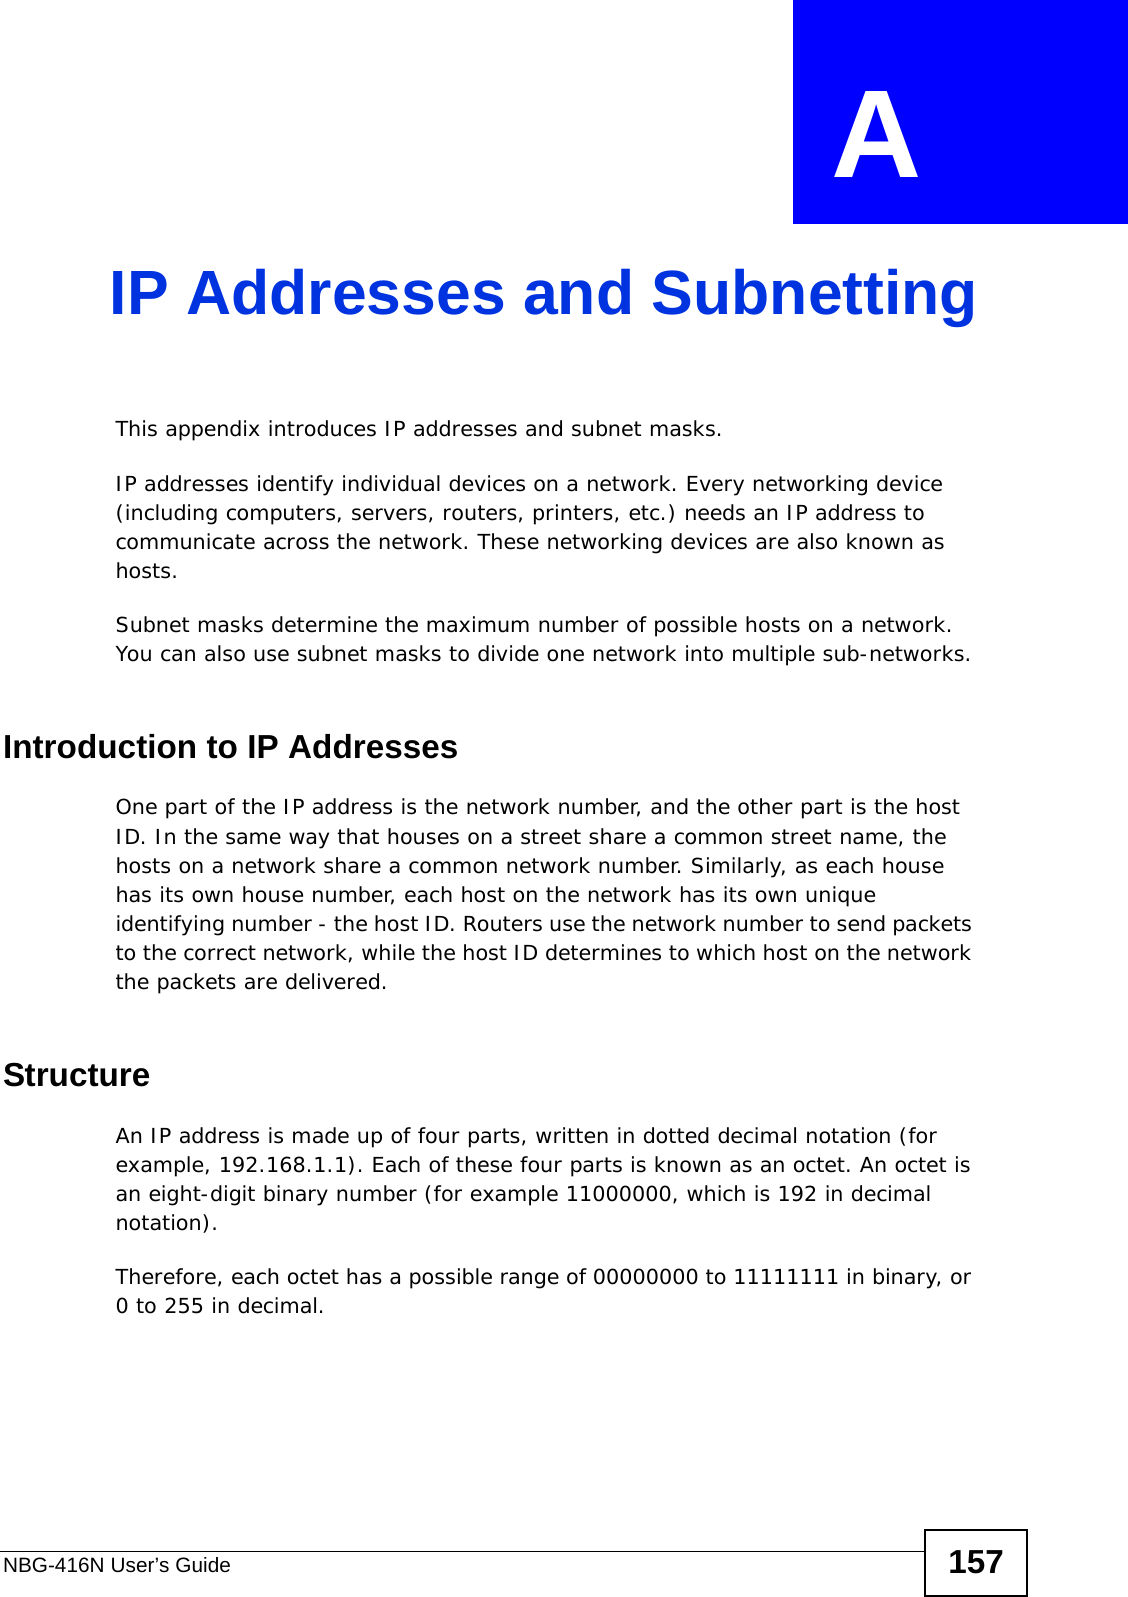 NBG-416N User’s Guide 157APPENDIX  A IP Addresses and SubnettingThis appendix introduces IP addresses and subnet masks. IP addresses identify individual devices on a network. Every networking device (including computers, servers, routers, printers, etc.) needs an IP address to communicate across the network. These networking devices are also known as hosts.Subnet masks determine the maximum number of possible hosts on a network. You can also use subnet masks to divide one network into multiple sub-networks.Introduction to IP AddressesOne part of the IP address is the network number, and the other part is the host ID. In the same way that houses on a street share a common street name, the hosts on a network share a common network number. Similarly, as each house has its own house number, each host on the network has its own unique identifying number - the host ID. Routers use the network number to send packets to the correct network, while the host ID determines to which host on the network the packets are delivered.StructureAn IP address is made up of four parts, written in dotted decimal notation (for example, 192.168.1.1). Each of these four parts is known as an octet. An octet is an eight-digit binary number (for example 11000000, which is 192 in decimal notation). Therefore, each octet has a possible range of 00000000 to 11111111 in binary, or 0 to 255 in decimal.